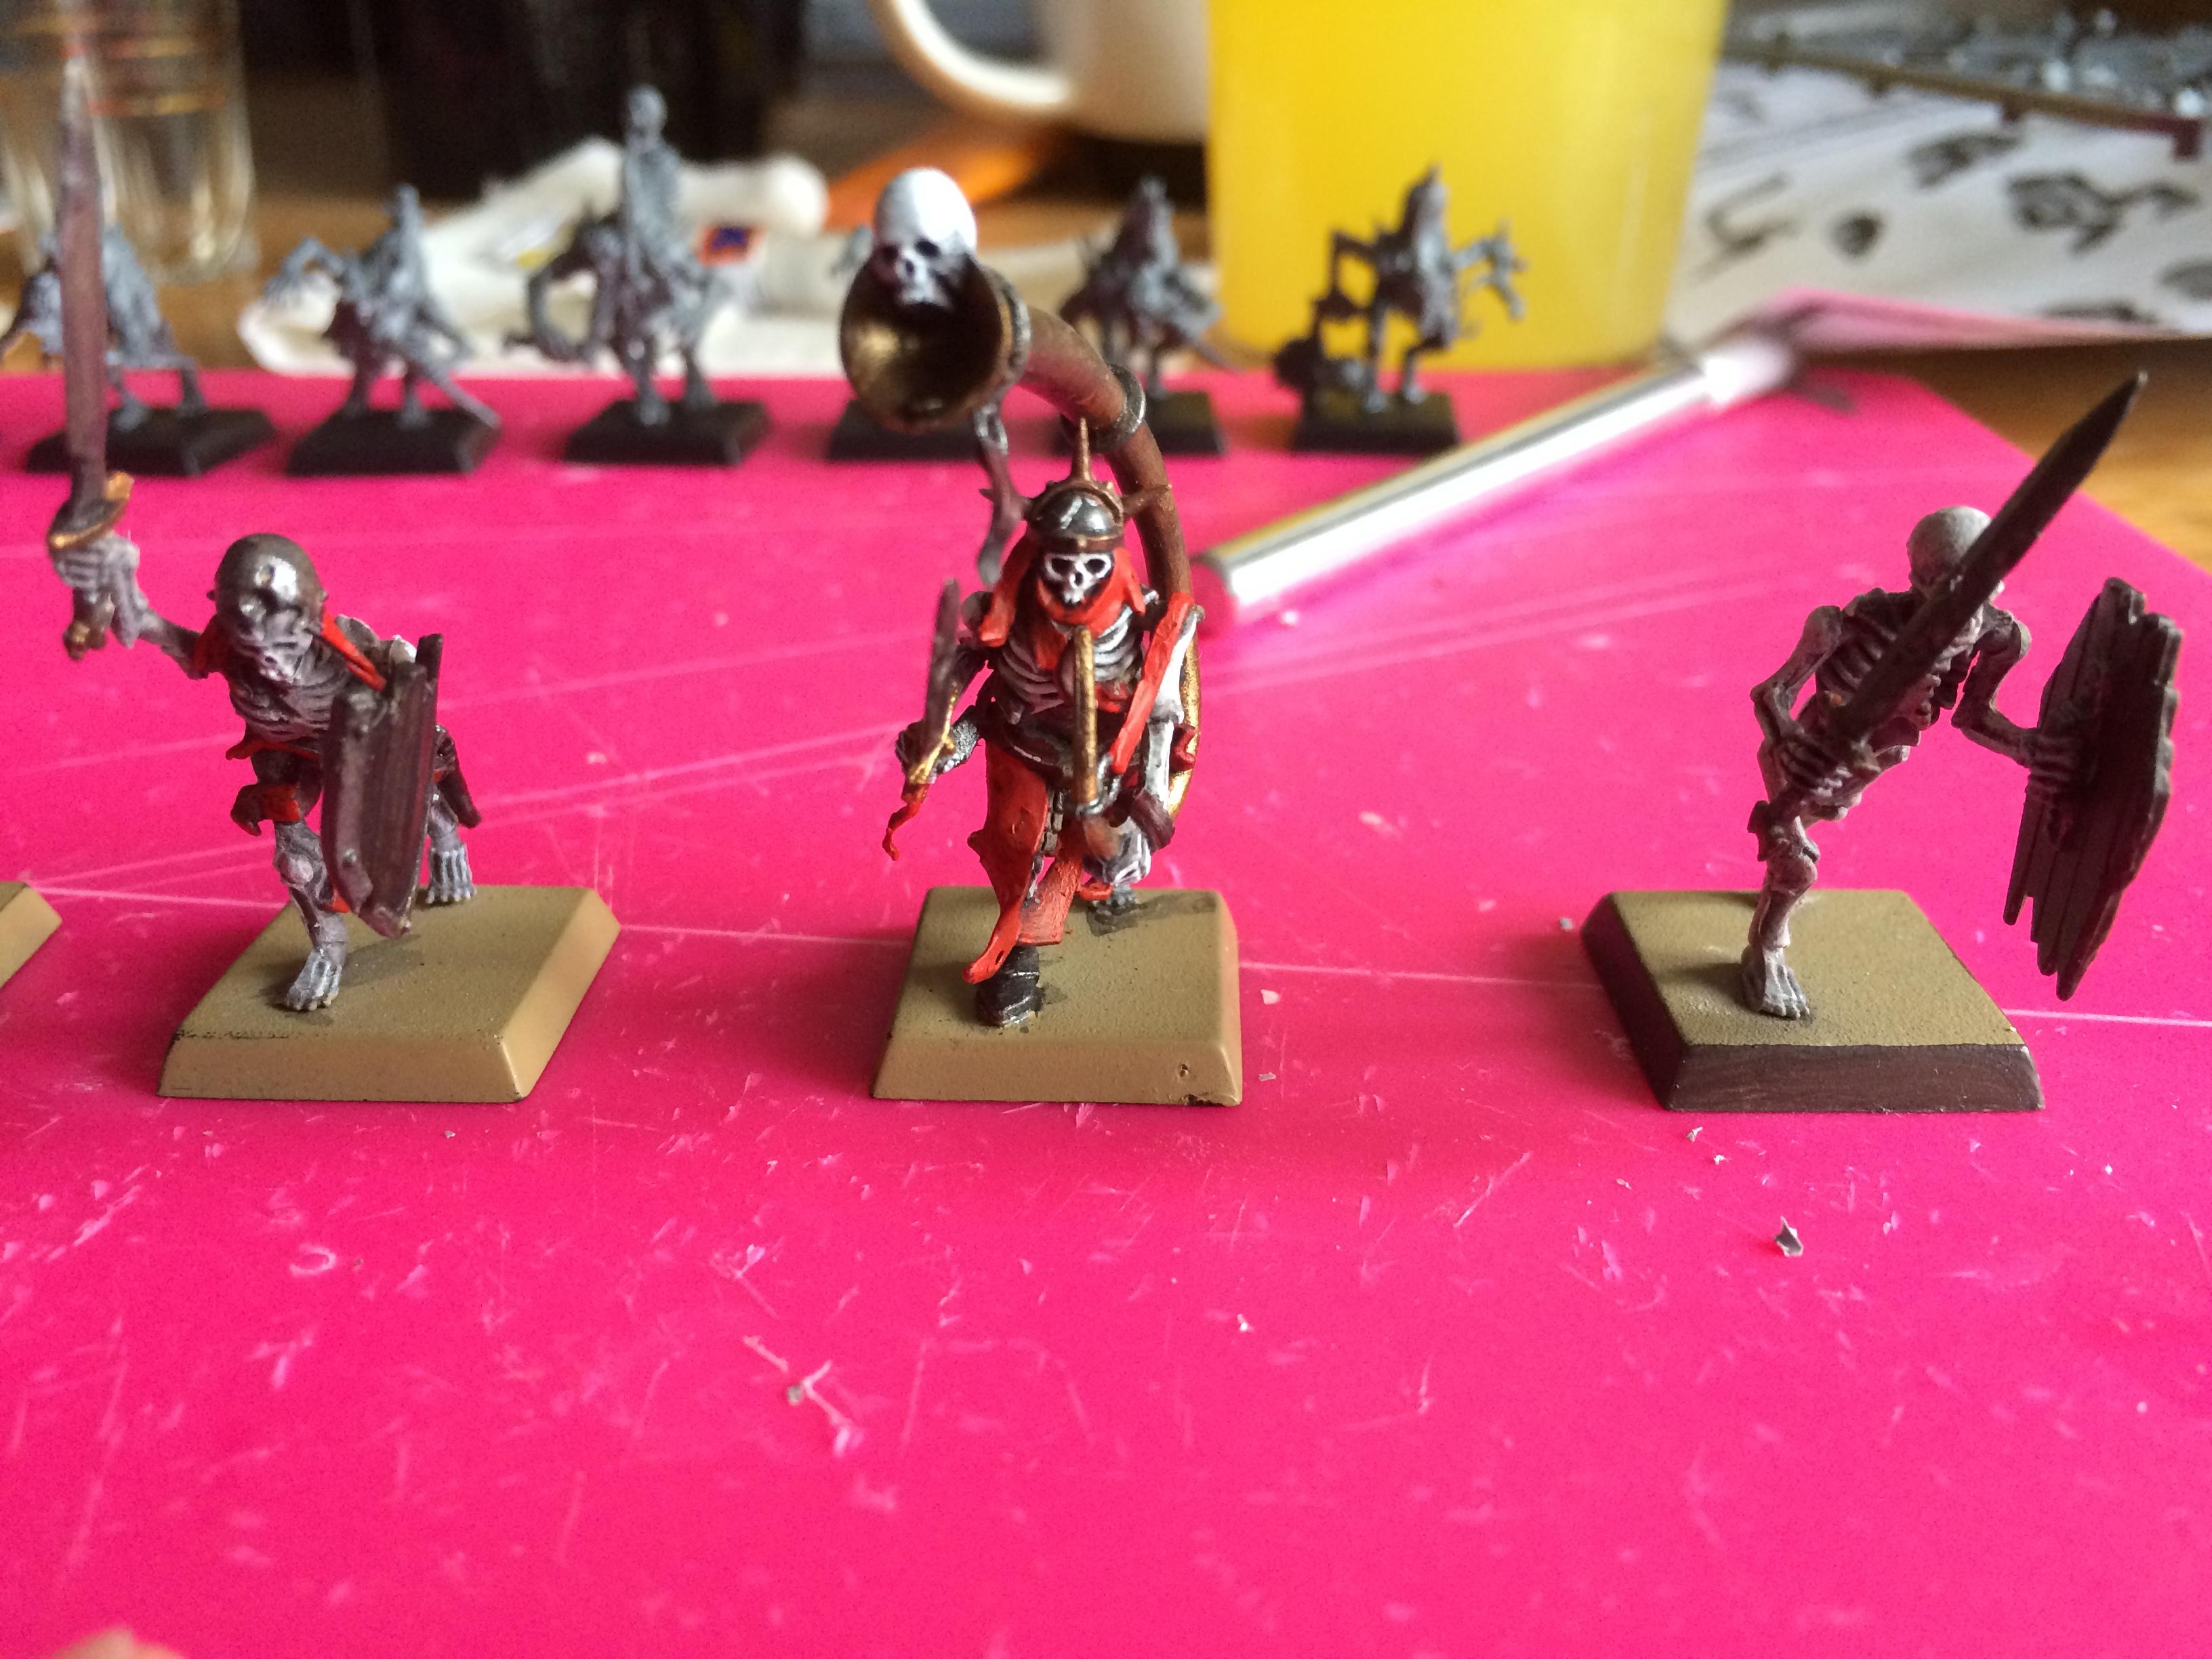 Skeletons so far complete for base to be done Right Side